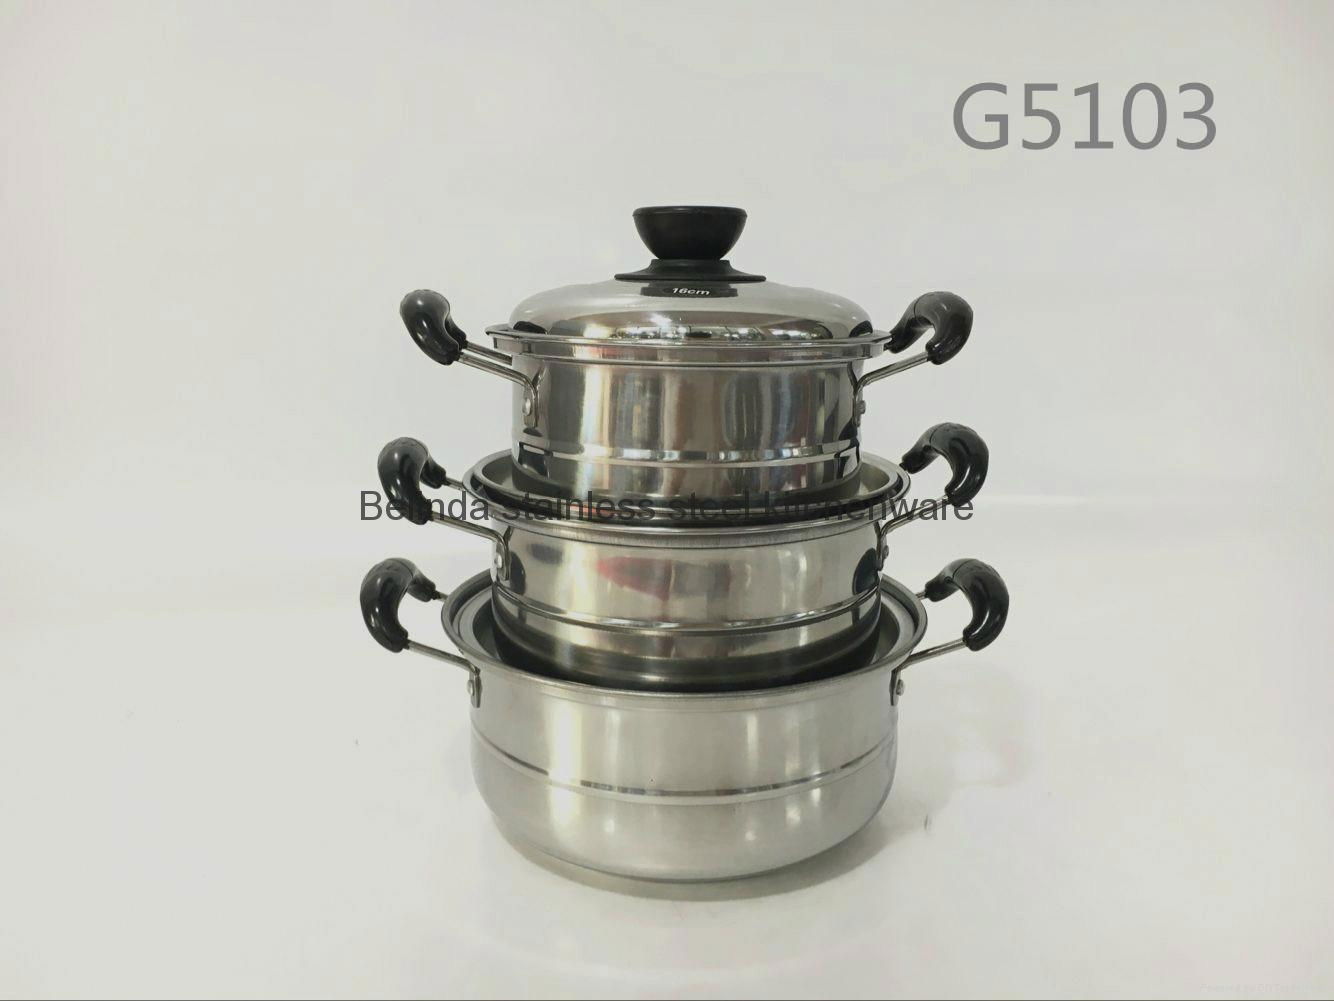 Chaoan Caitang Hot Sell Stainless Steel Pot Set with Stainless Steel Lids 4